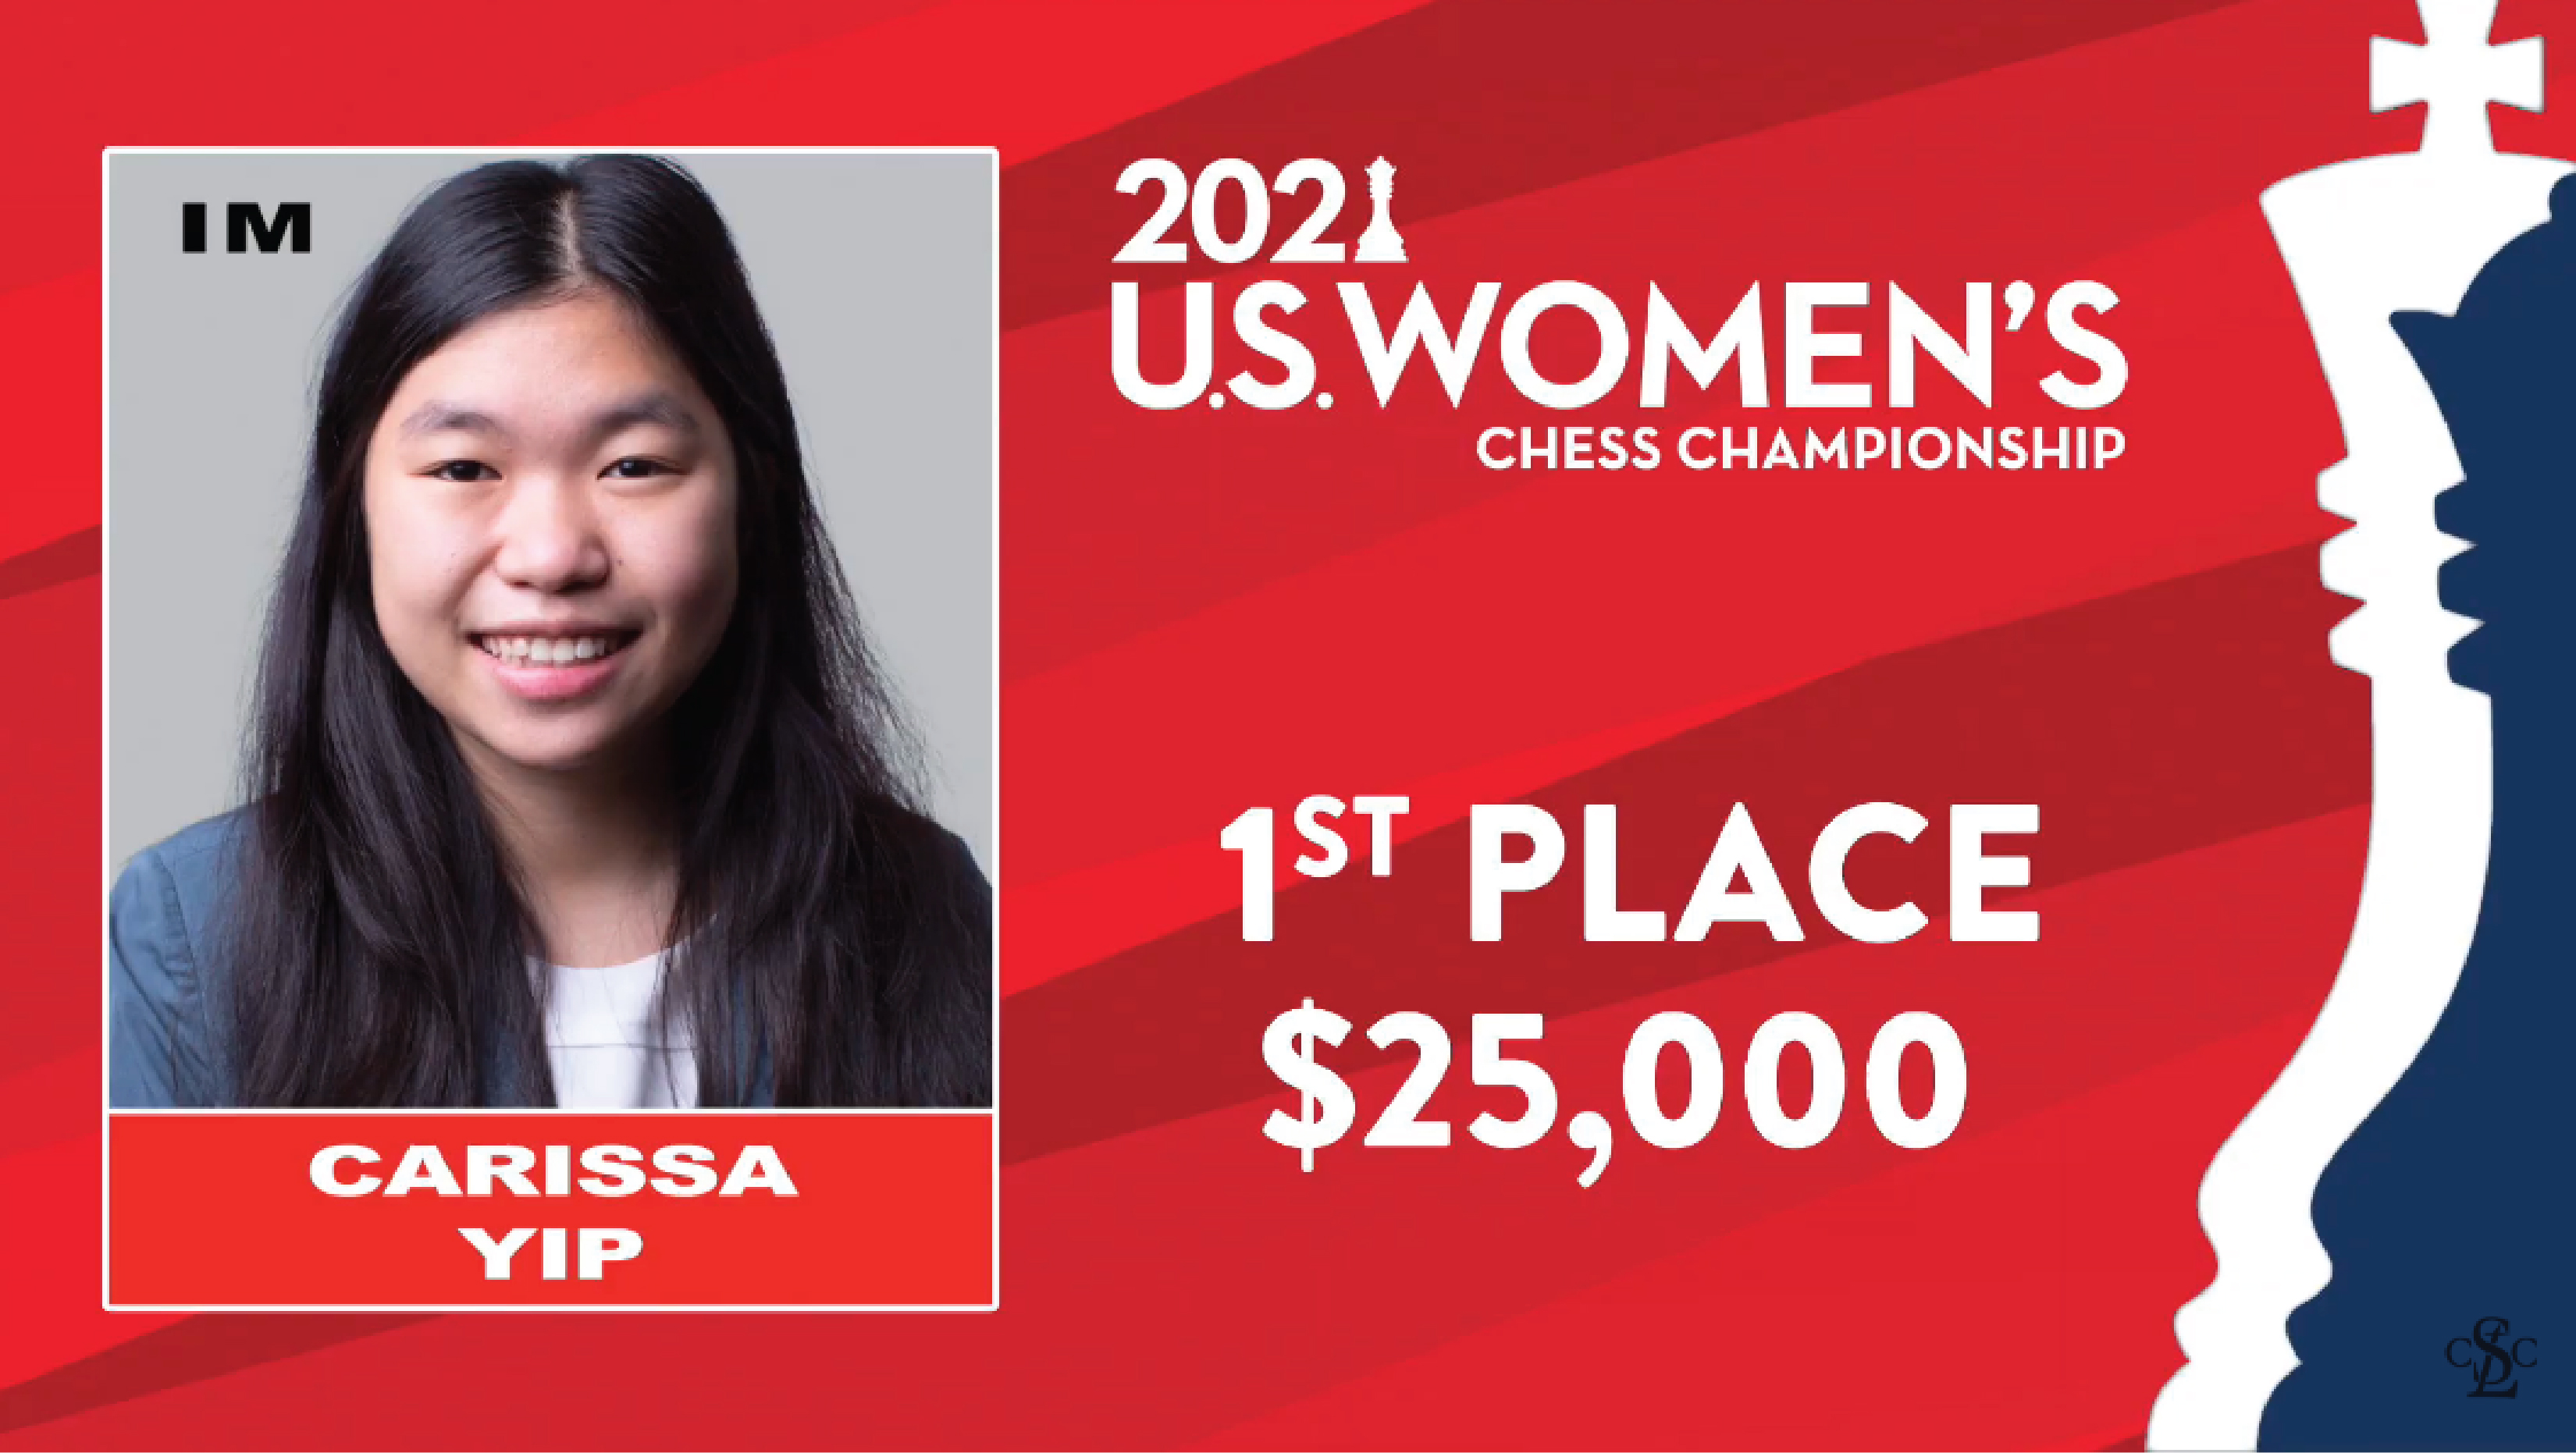 Lubbockite claims win at U.S. Women's Chess Championship in St. Louis